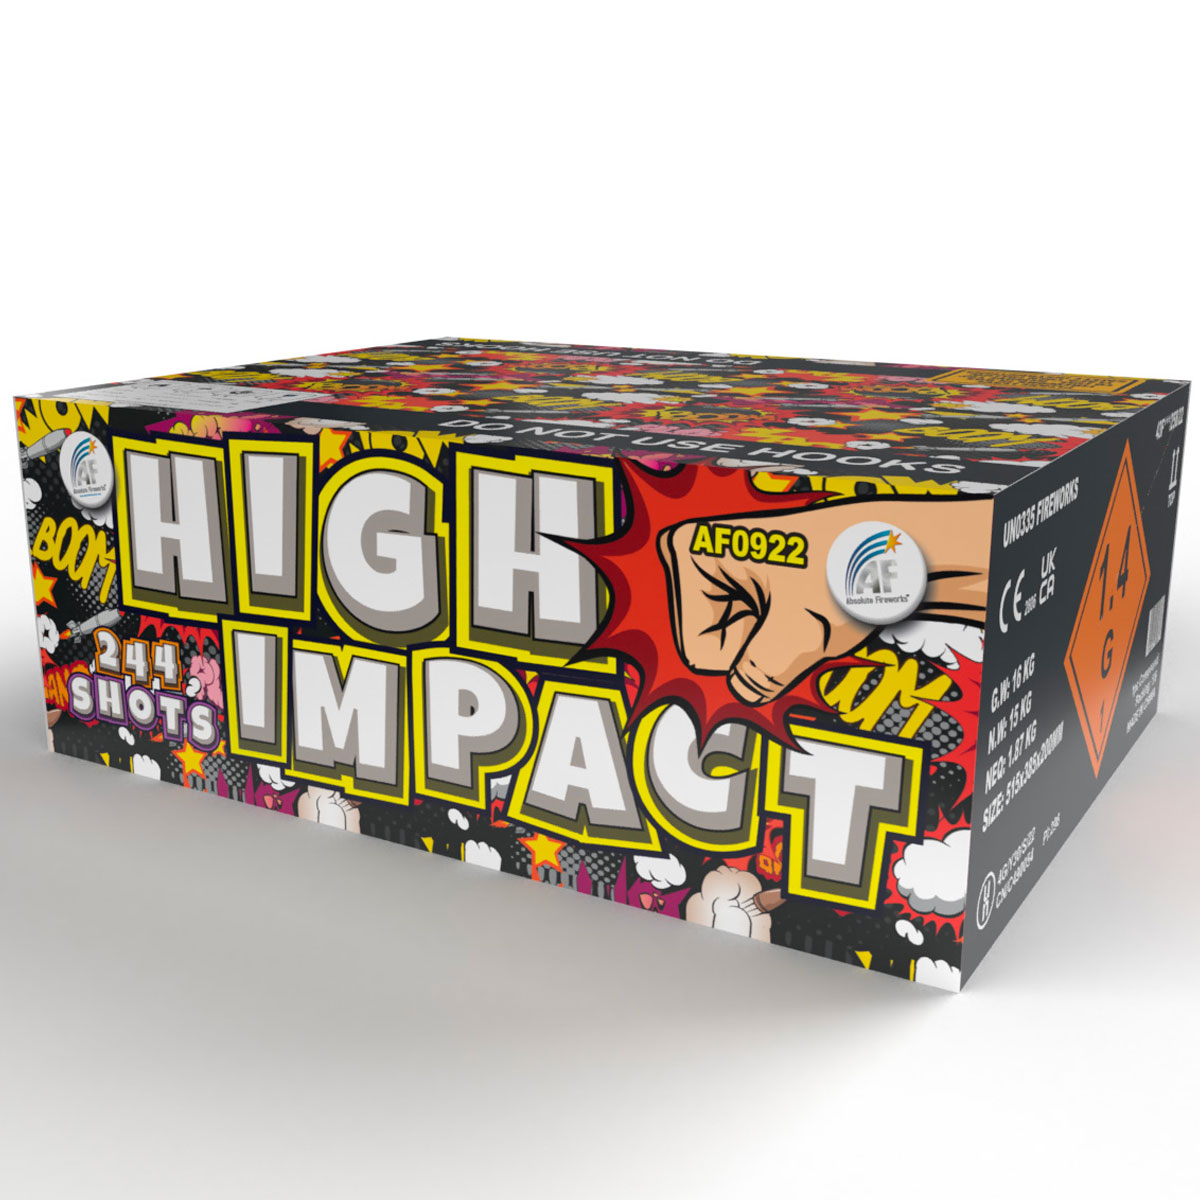 high impact by absolute fireworks, available at Paul's fireworks